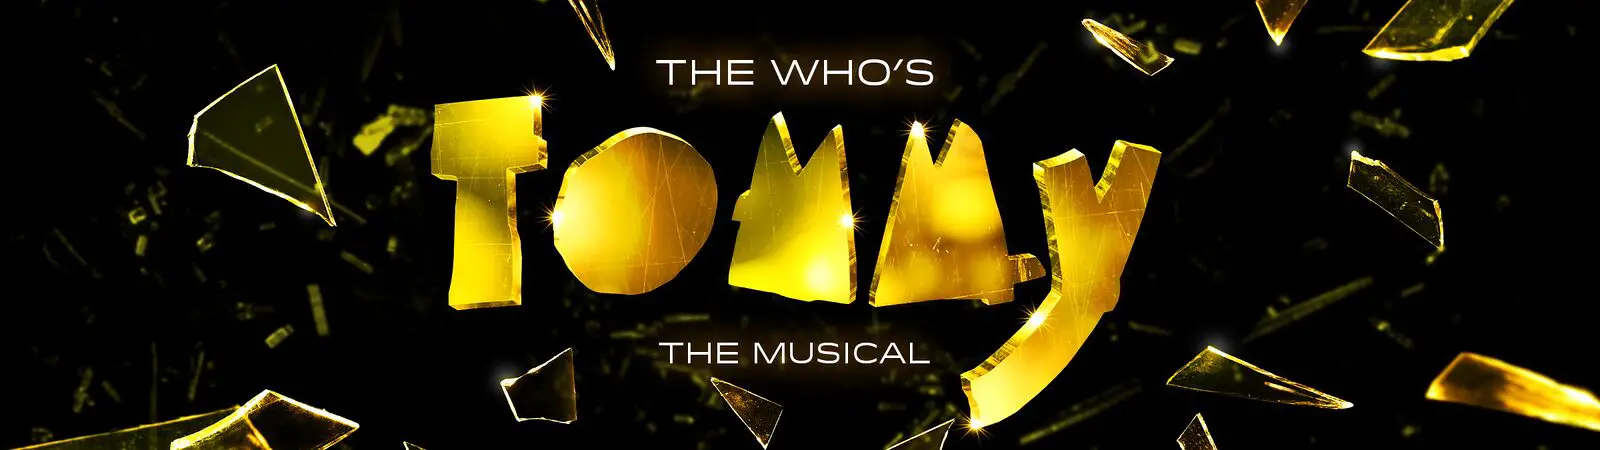 The Who's musical banner